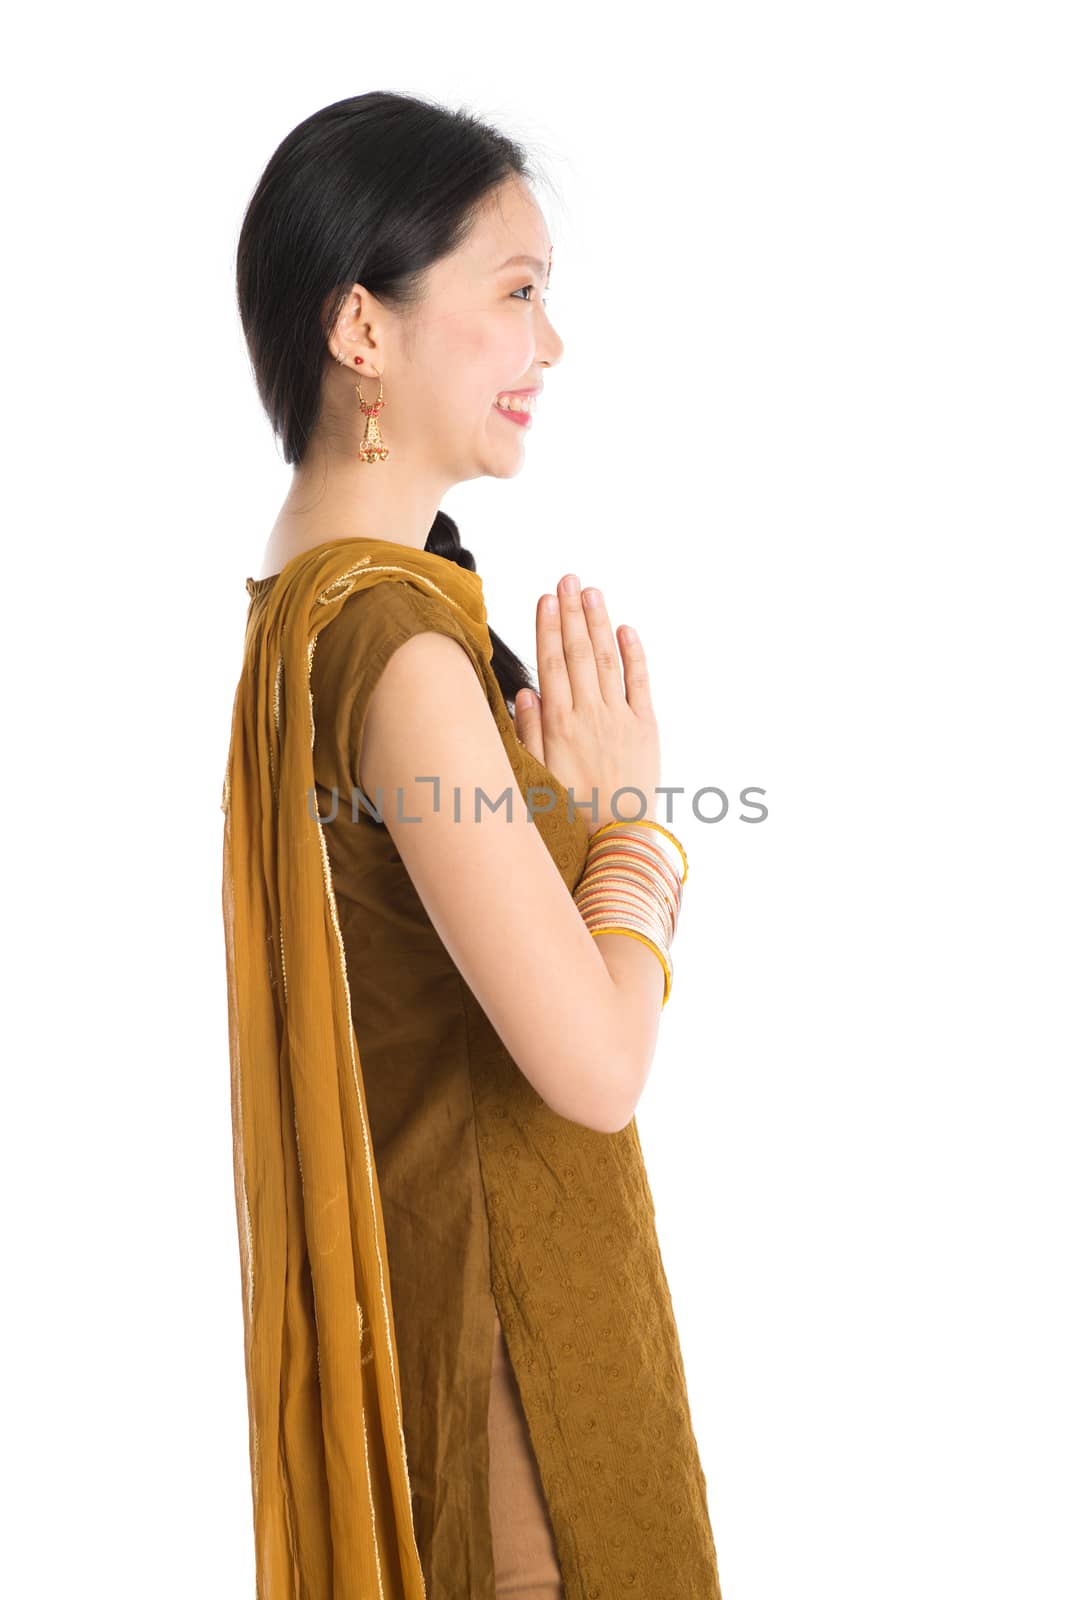 Side view young mixed race Indian Chinese girl in traditional punjabi dress greeting, standing isolated on white background.